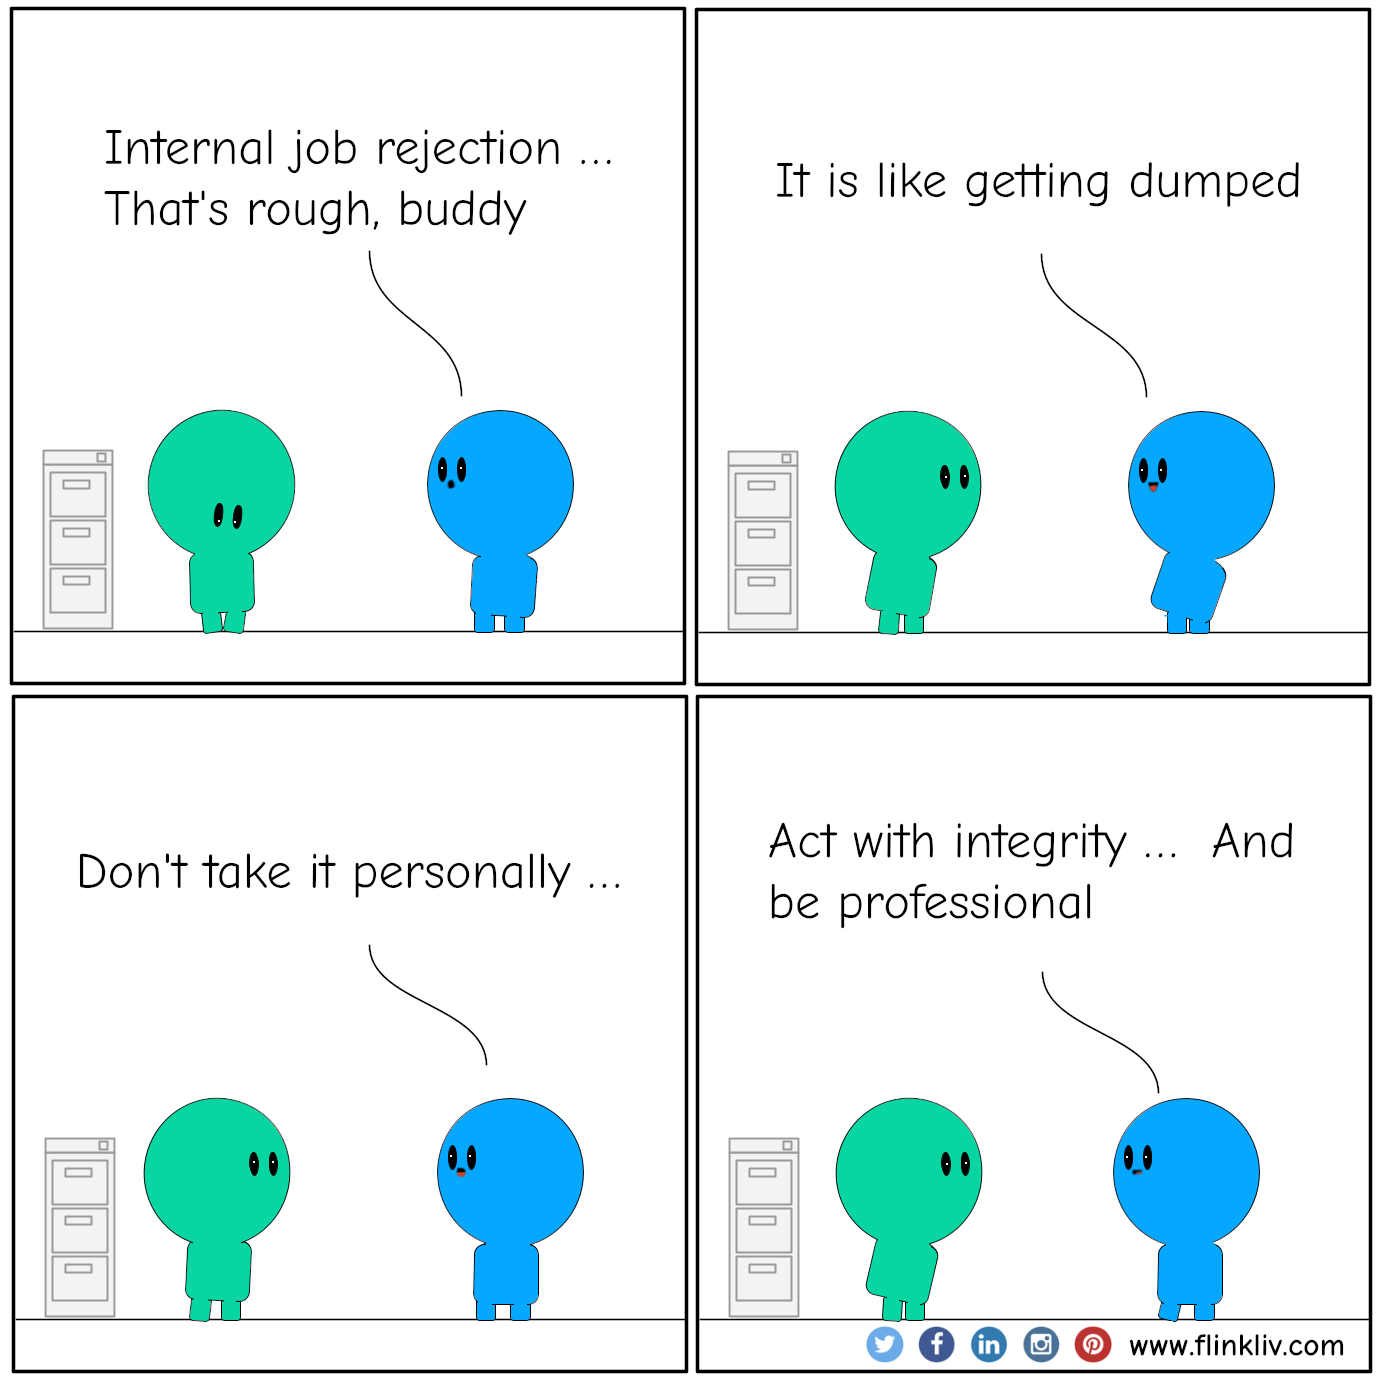 Conversation between A and B about how to handle internal job rejection.
				B: Internal job rejection, That's rough, buddy. 
				B: It is like getting dumped. 
				B: Don't take it personally. 
				B: Act with integrity,  and be professional. 
			